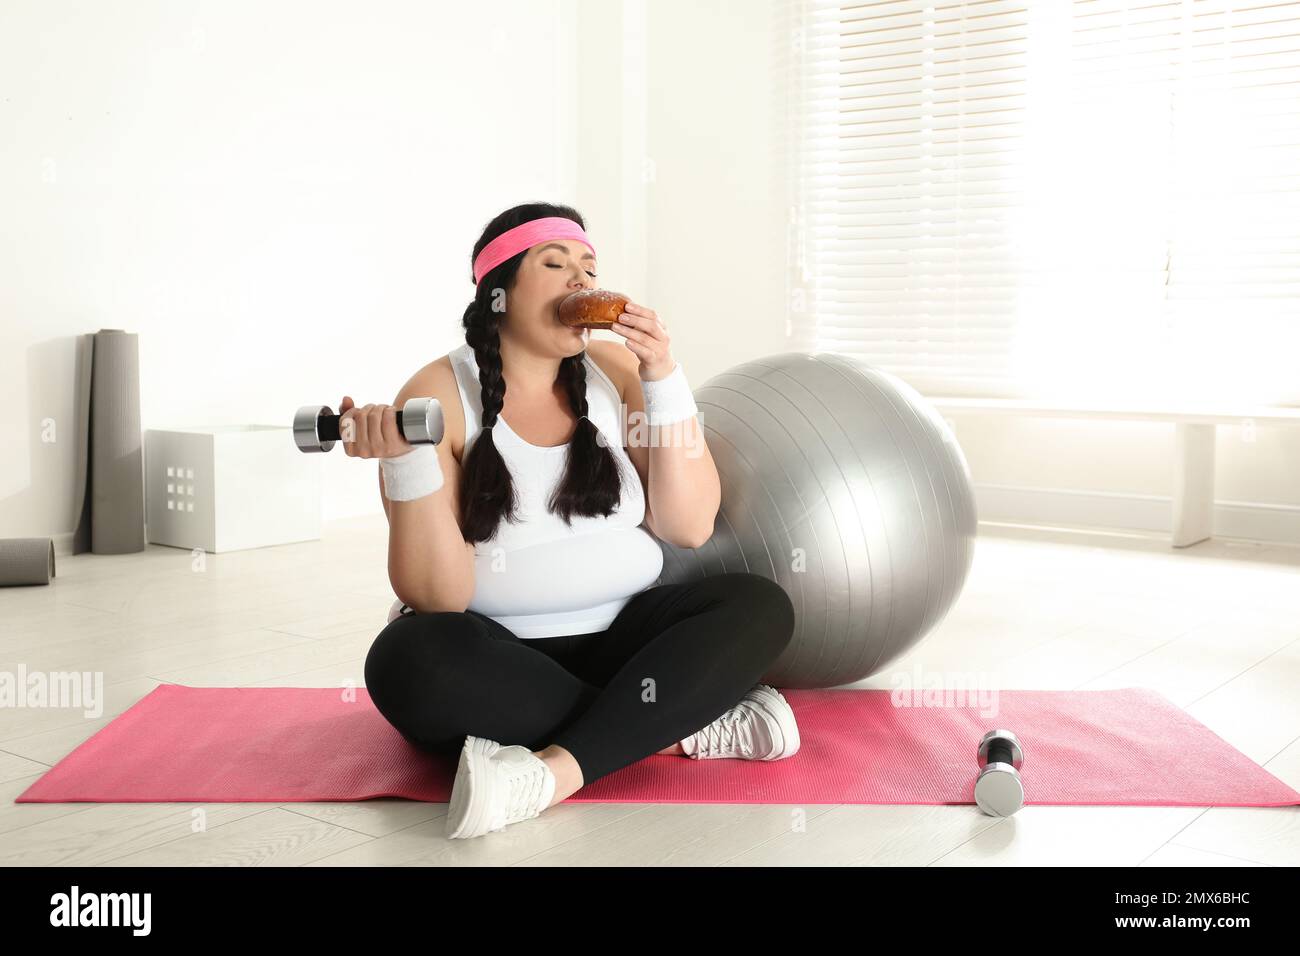 Lazy overweight woman eating bun at gym Stock Photo